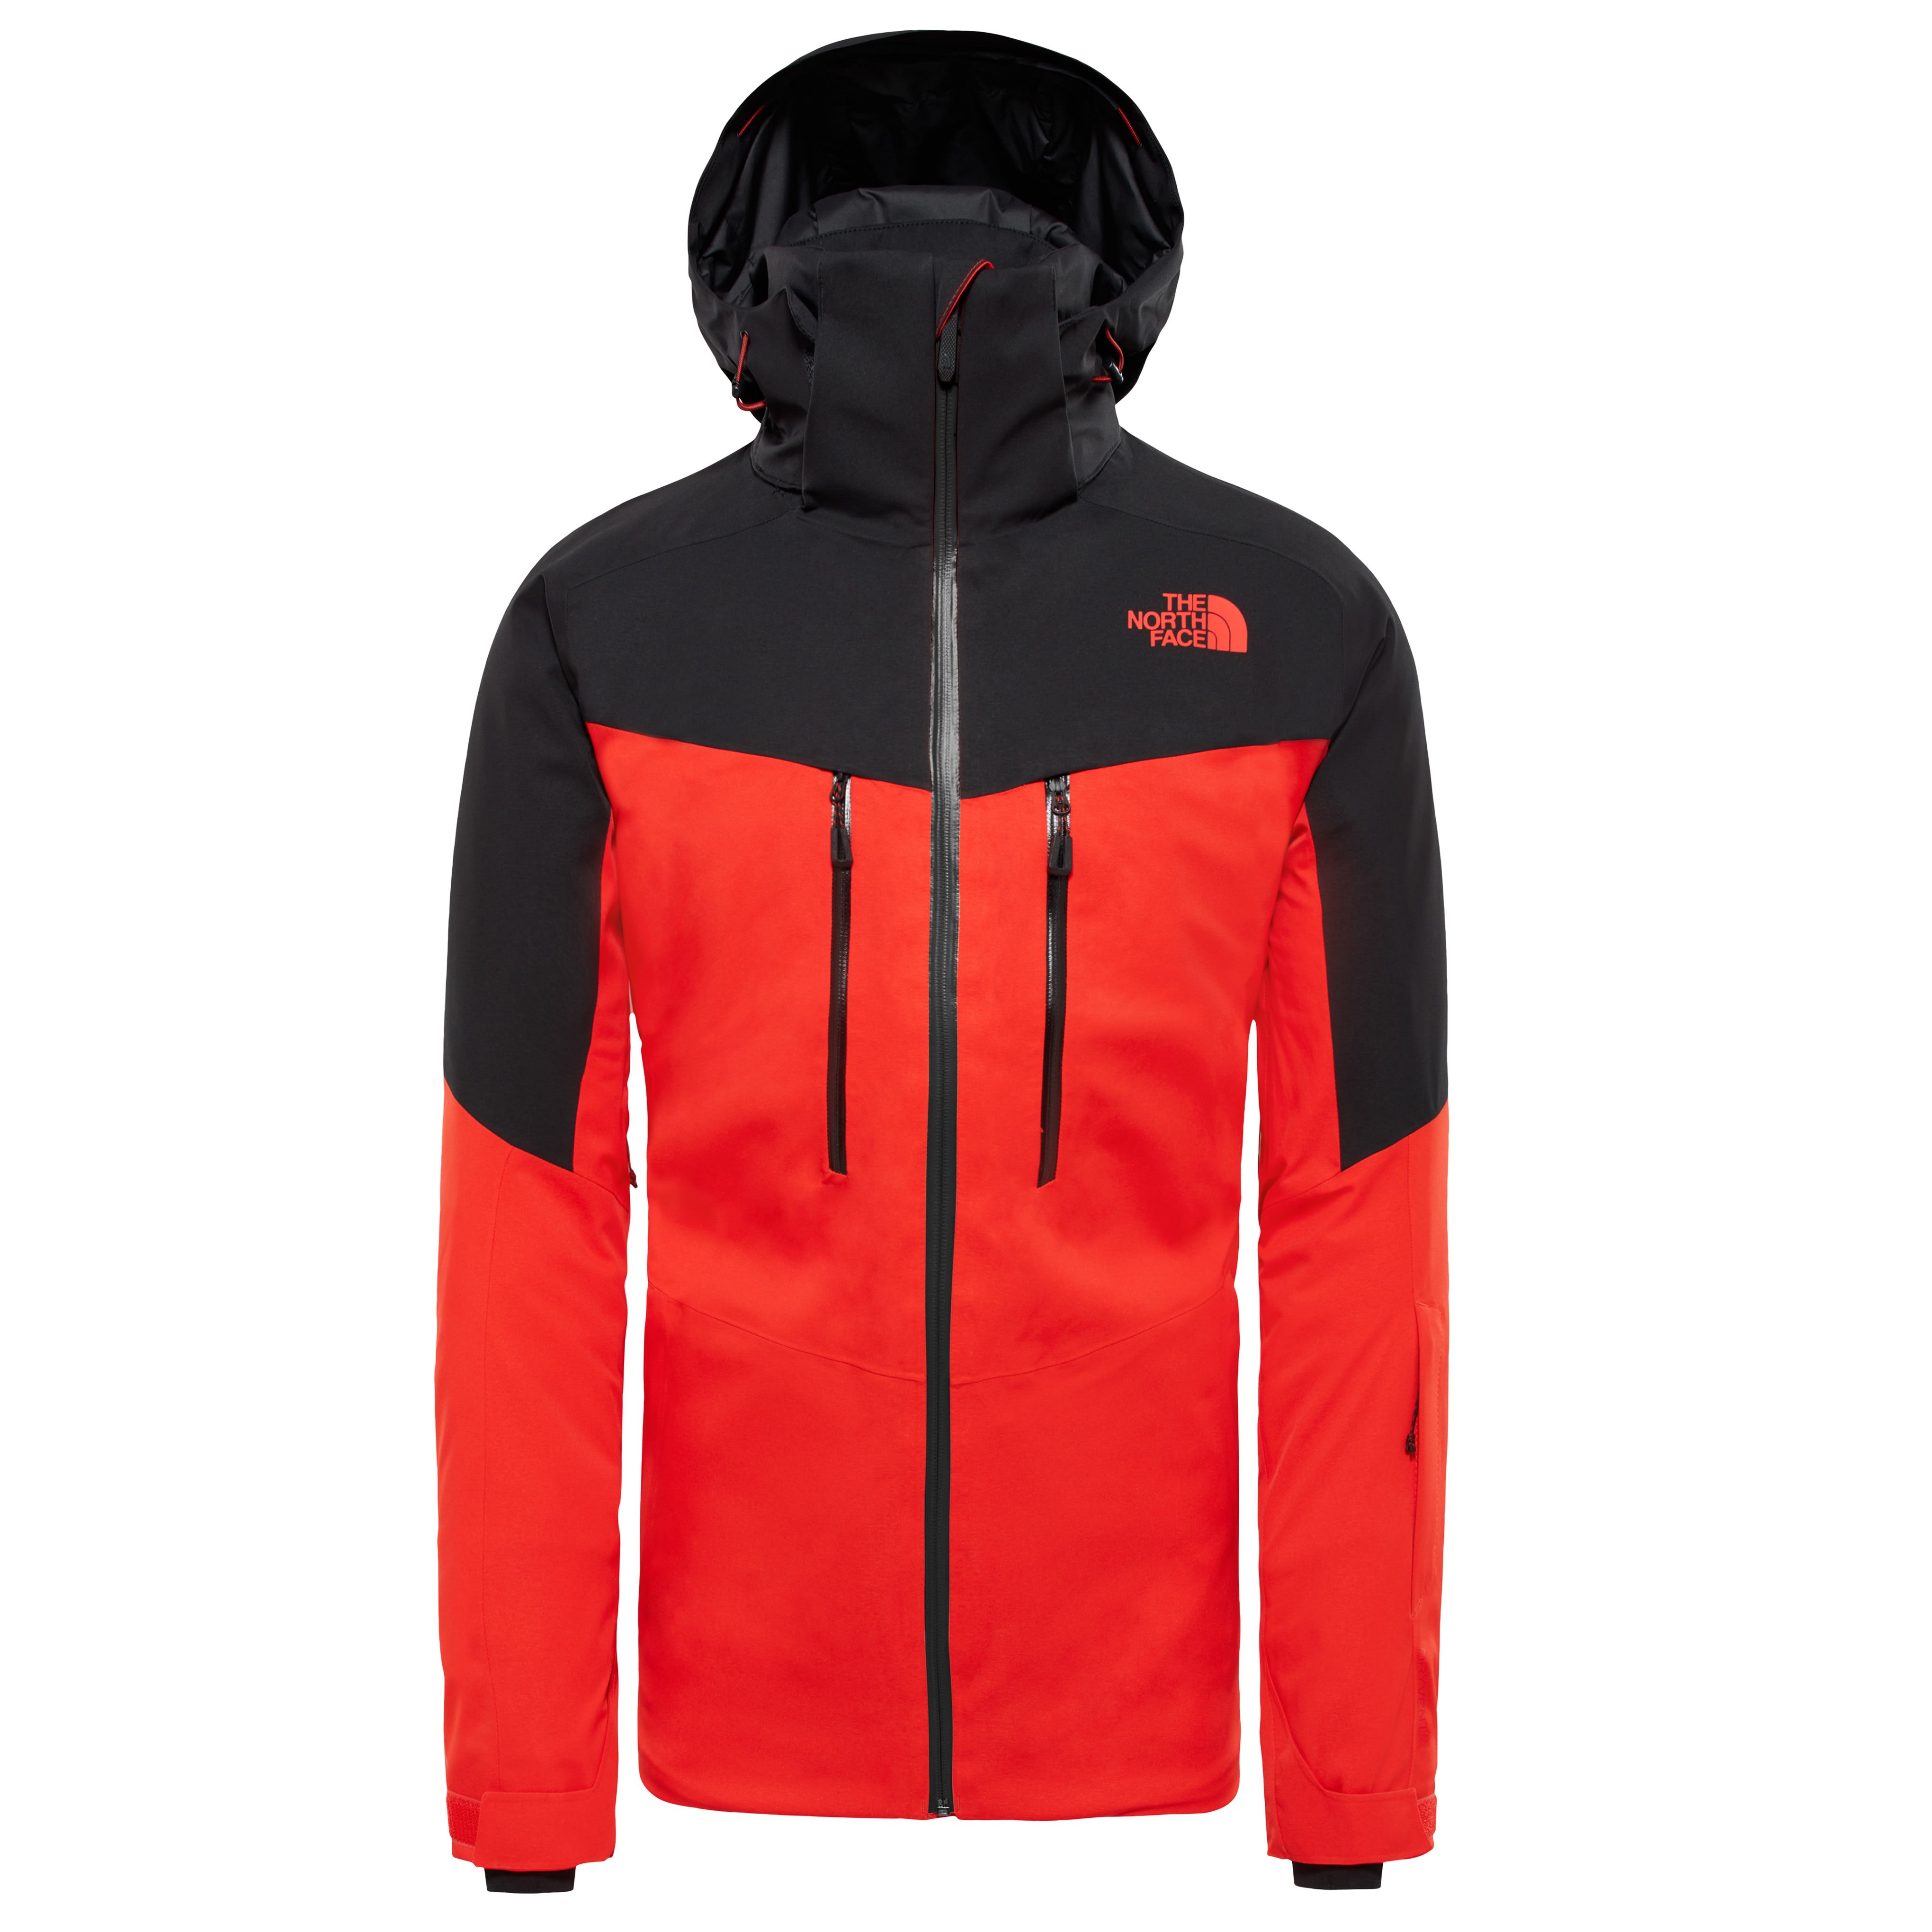 Buy The North Face M Chakal Jacket from Outnorth